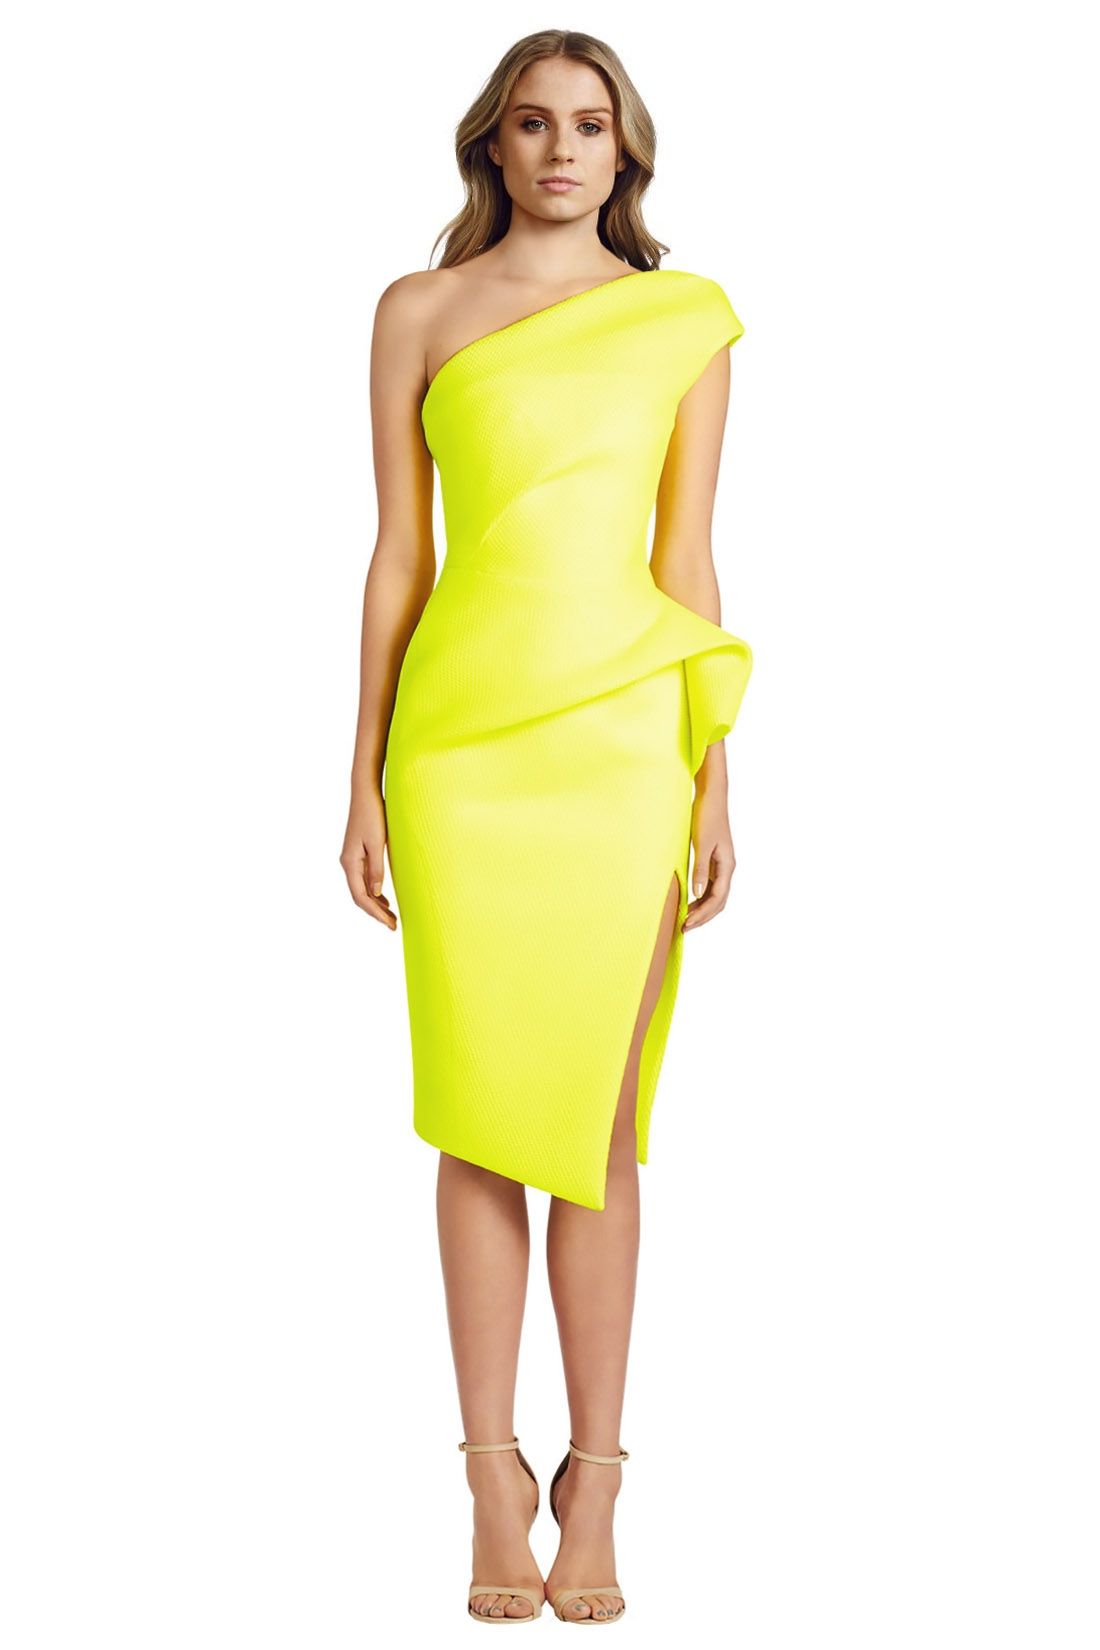 Maticevski - Division Dress - Yellow - Front